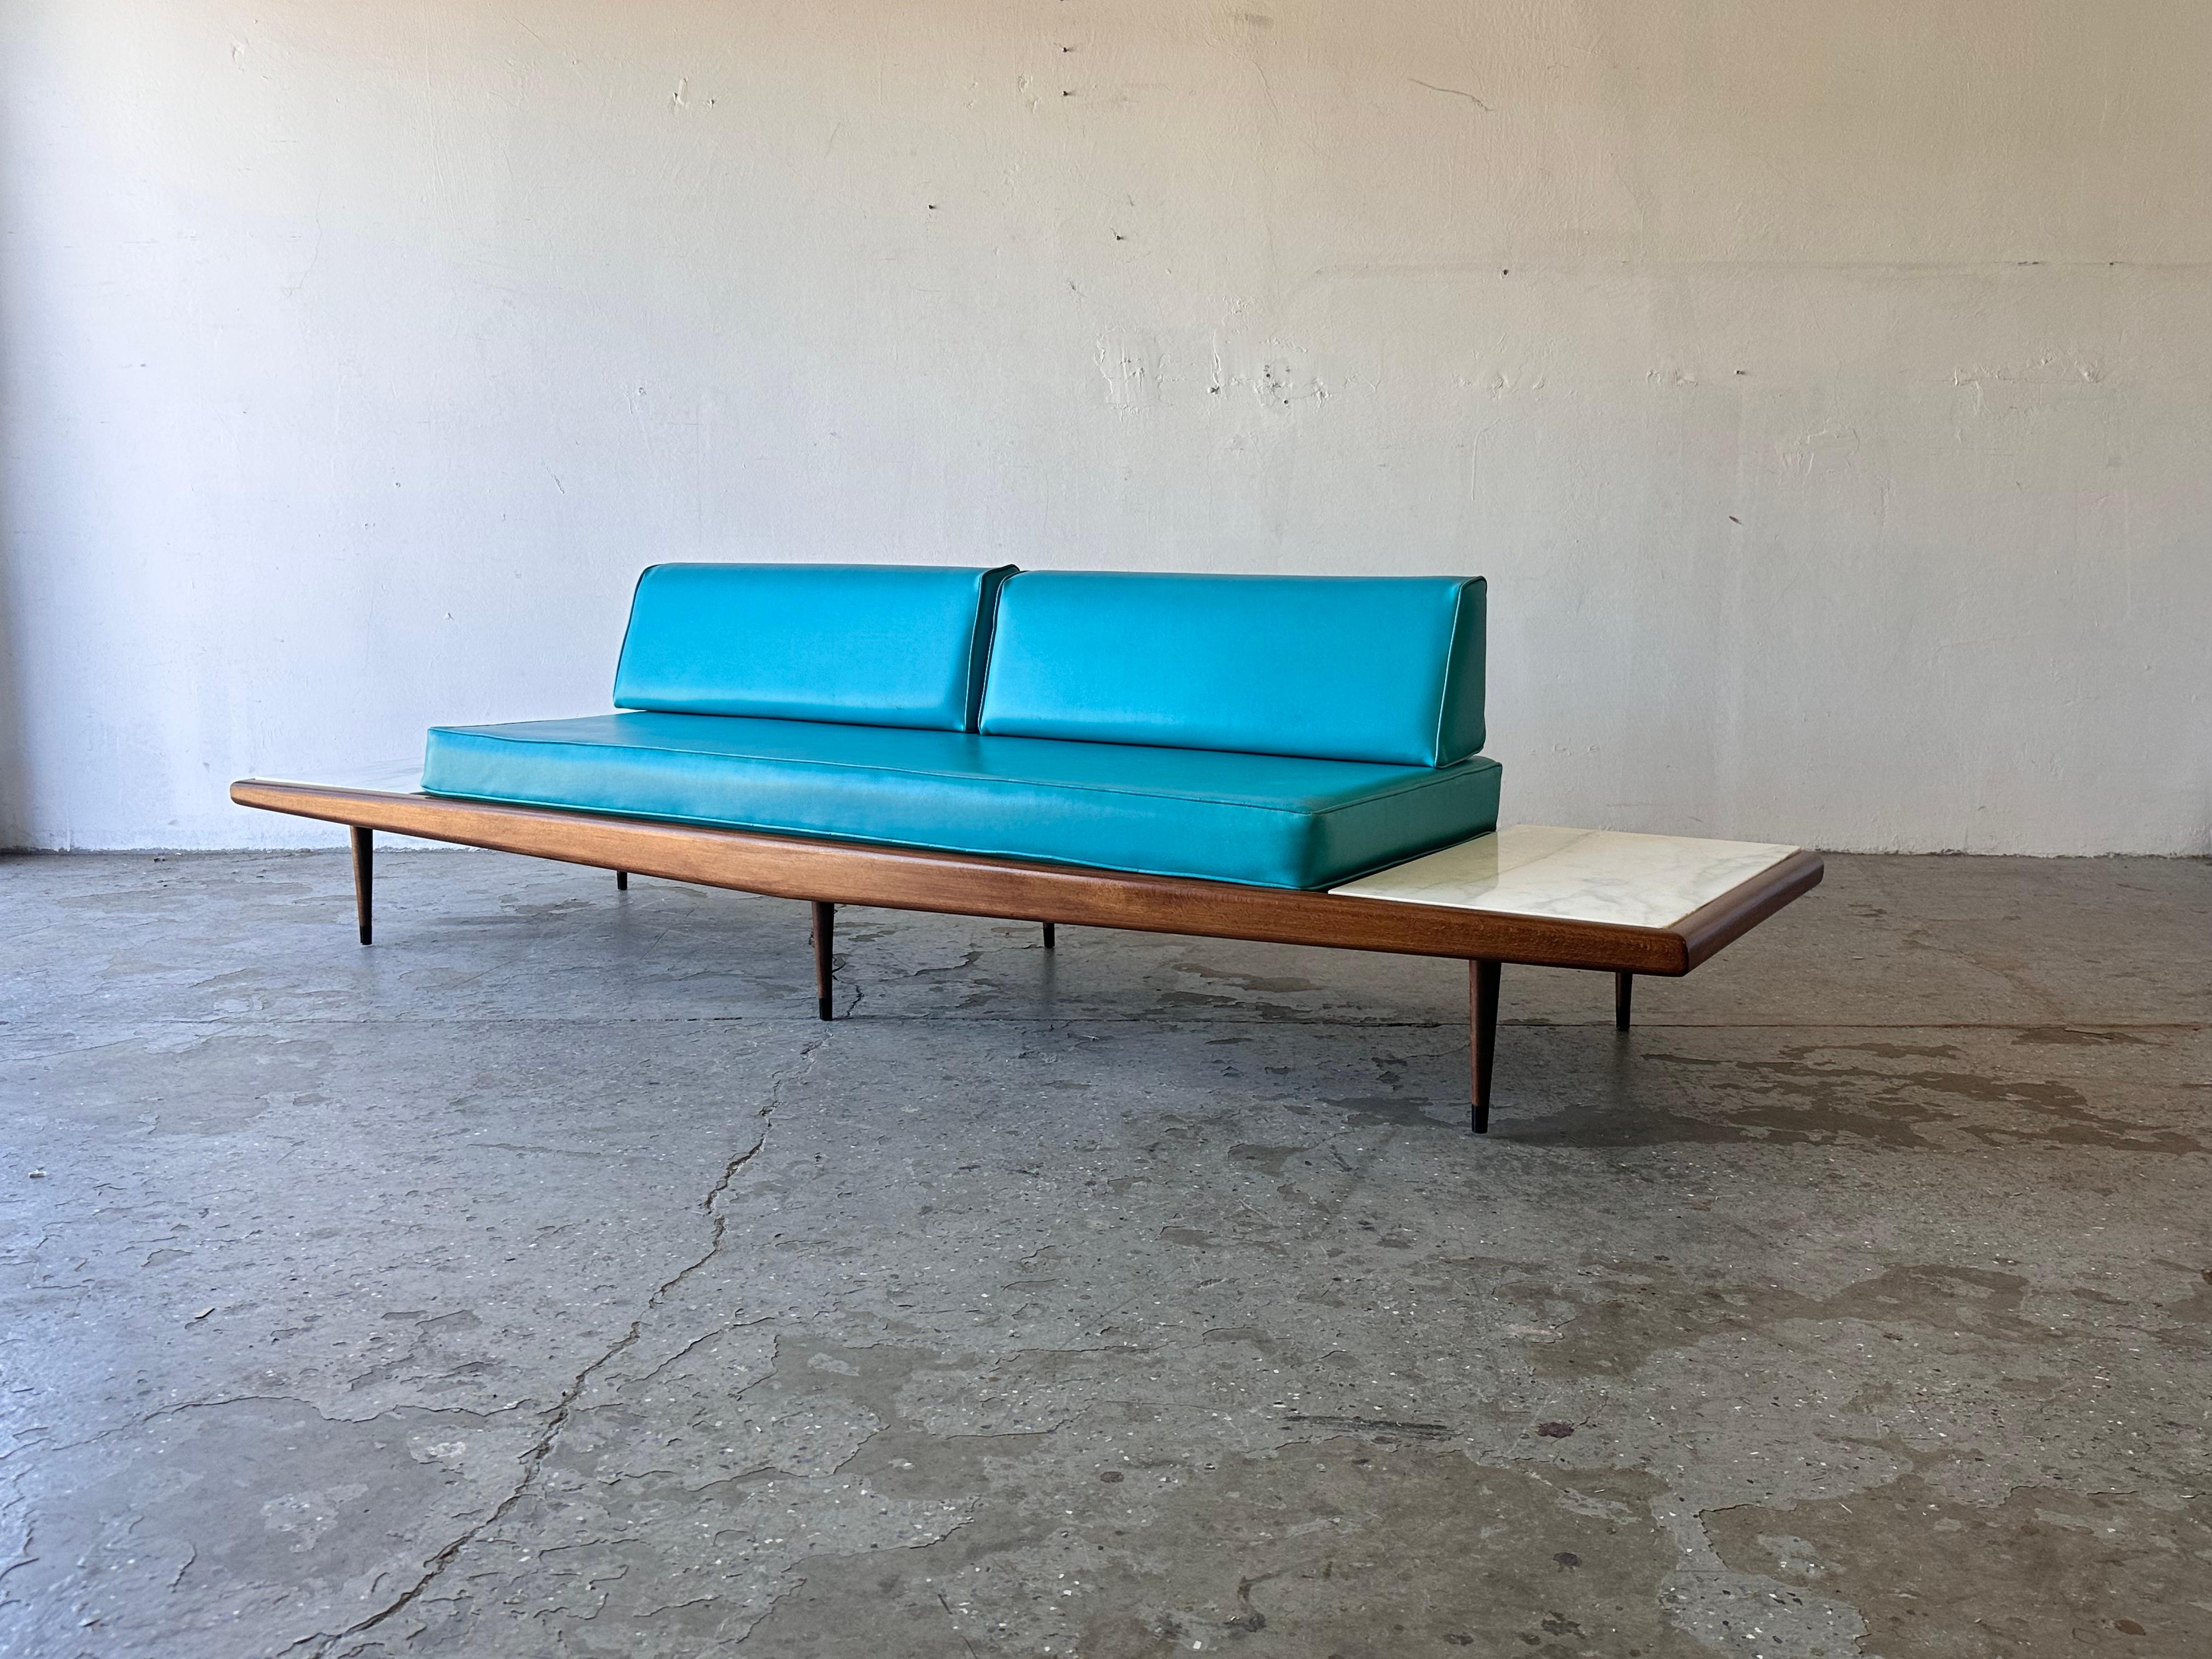 Adrian Pearsall  Mid-Century Modern Long Gondola Sofa - Daybed

Stunning Mid-Century Modern Long Gondola sofa / Daybed . This sofa  has very sought after floating quality that his designs are famous for. Features Italian marble  attached side